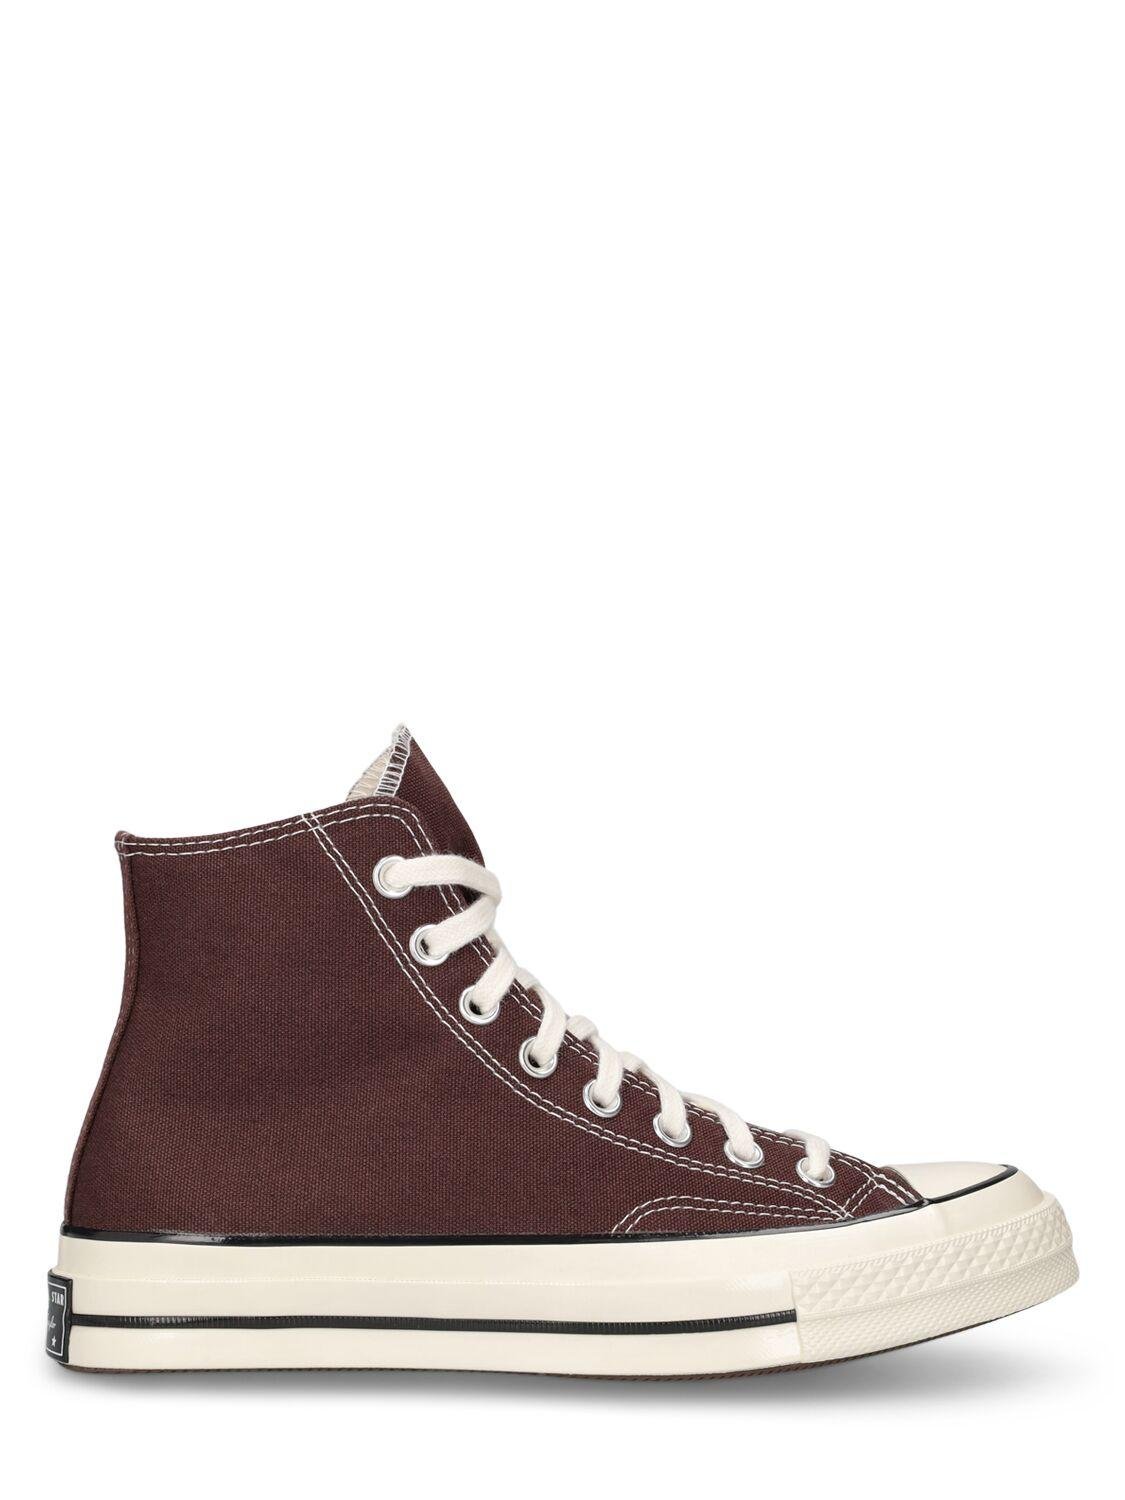 Chuck 70 Hi Sneakers by CONVERSE